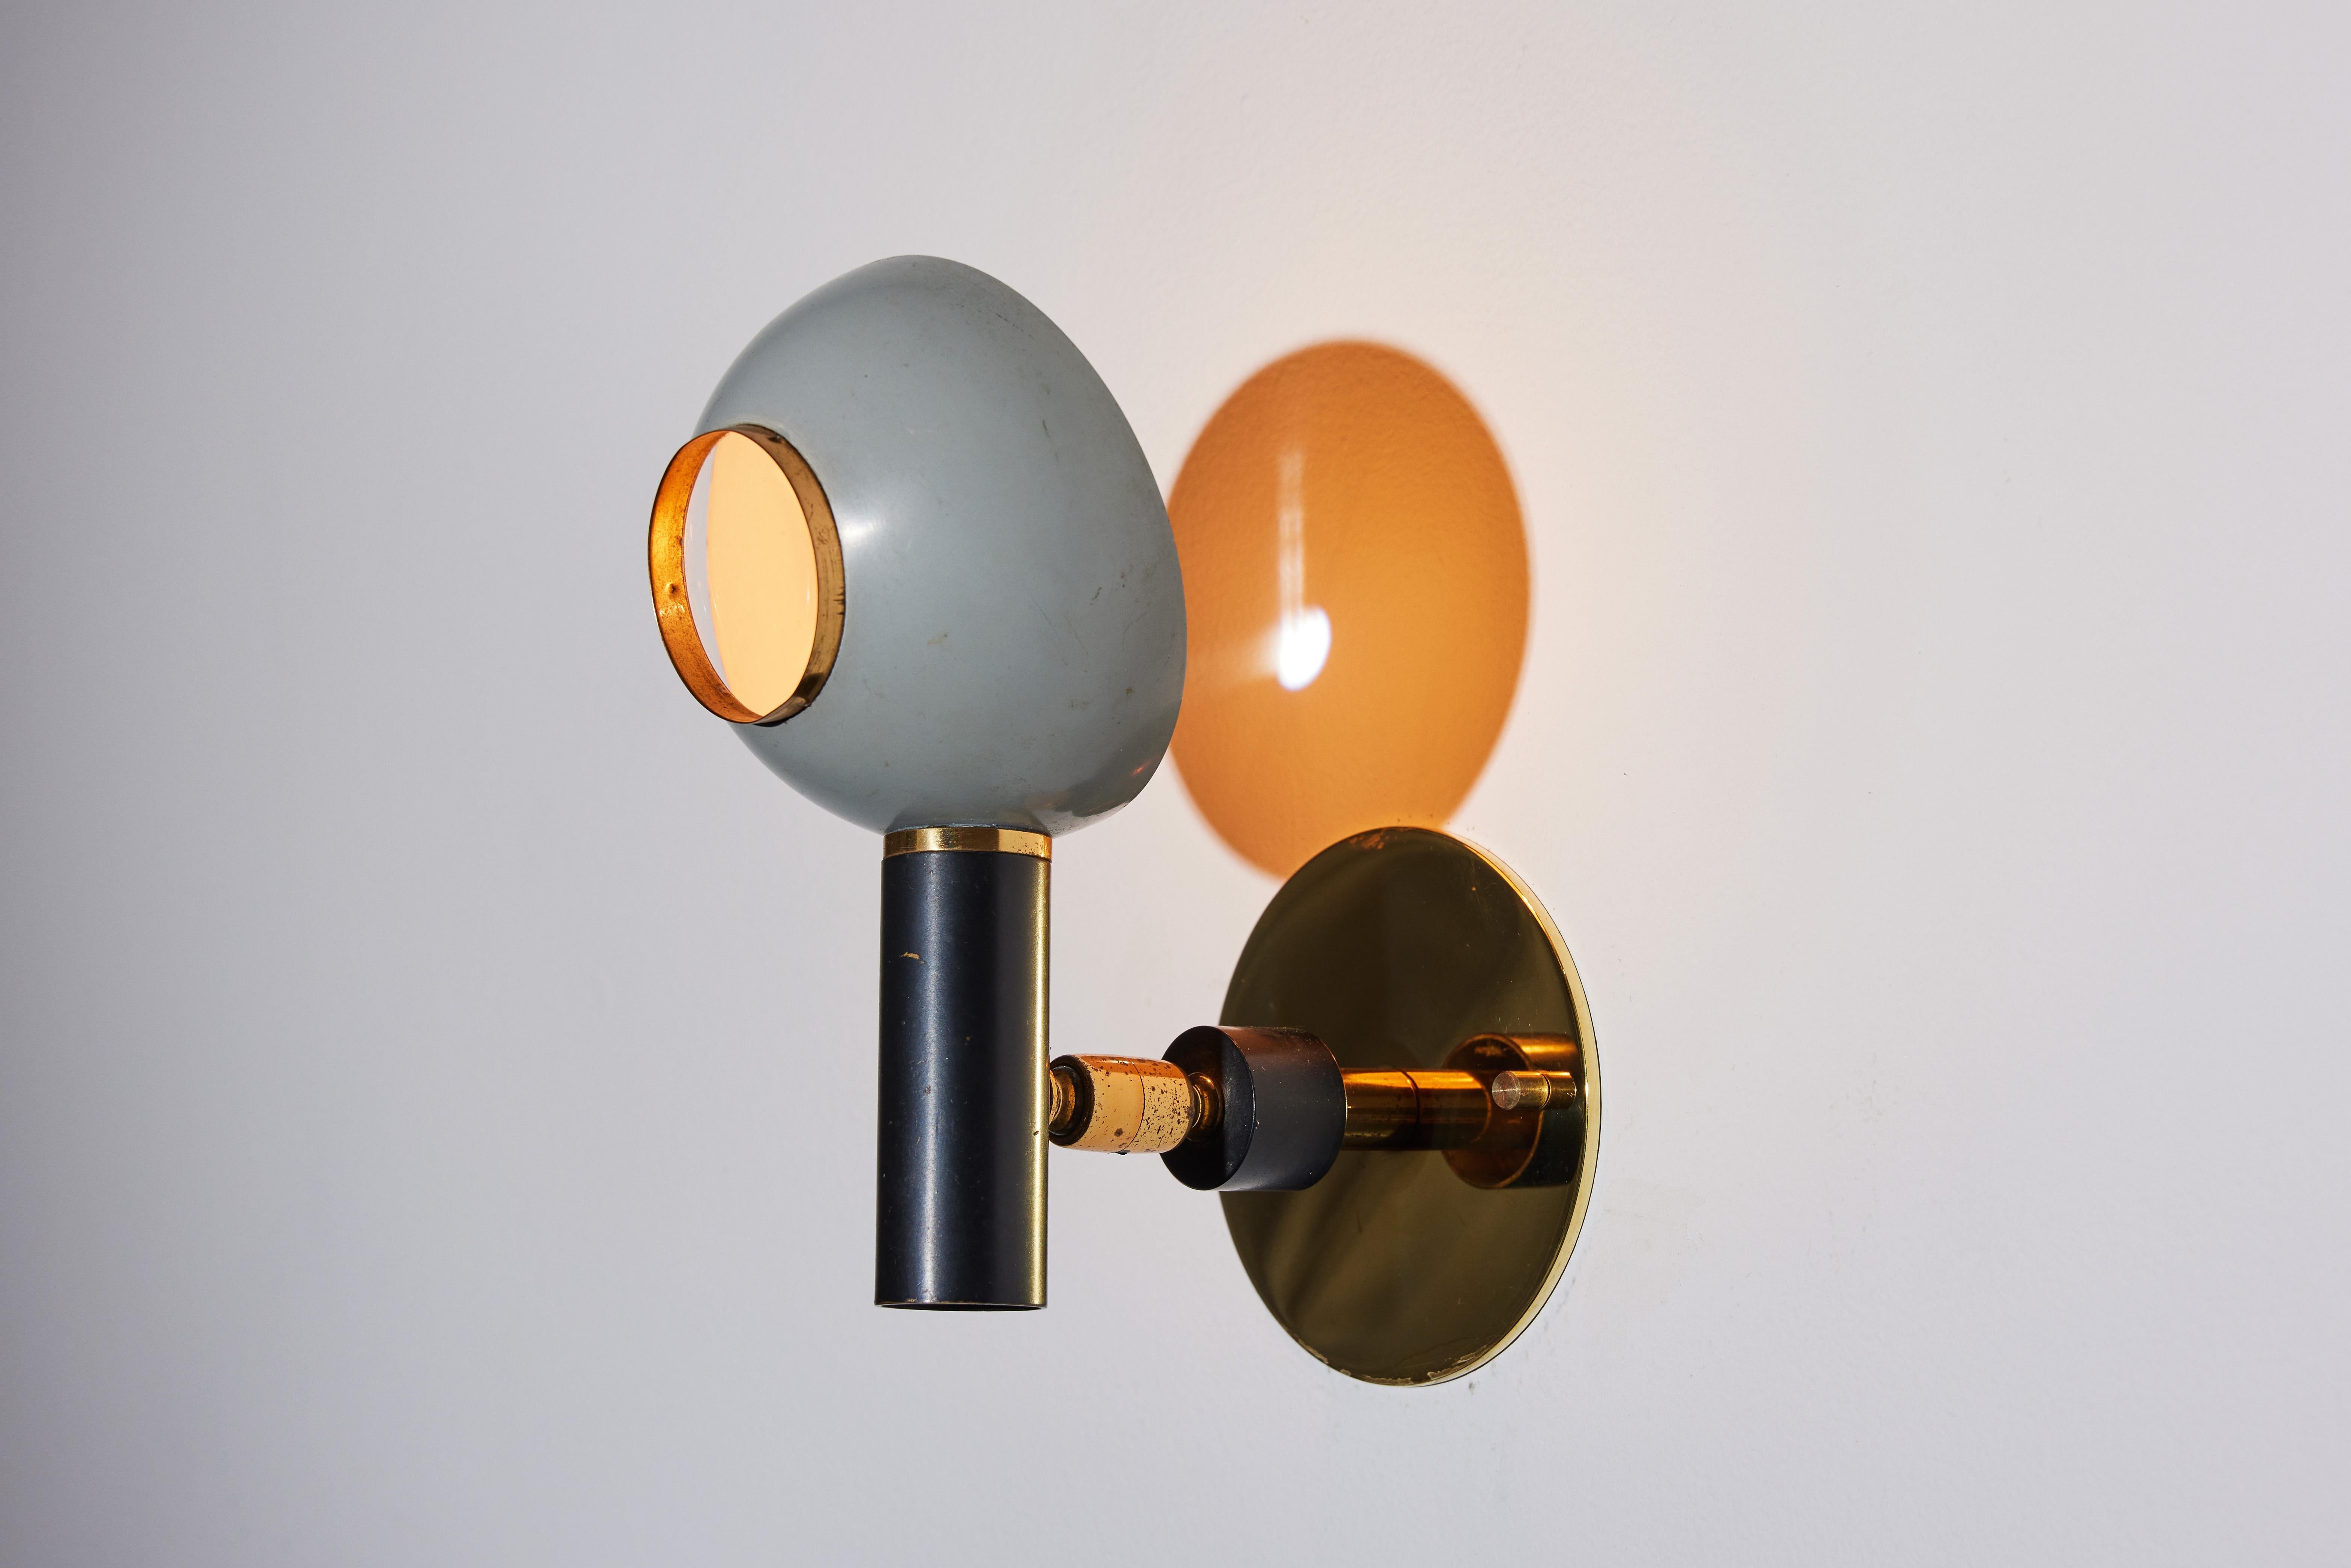 Pair of Sconces by Oscar Torlasco for Lumi 2